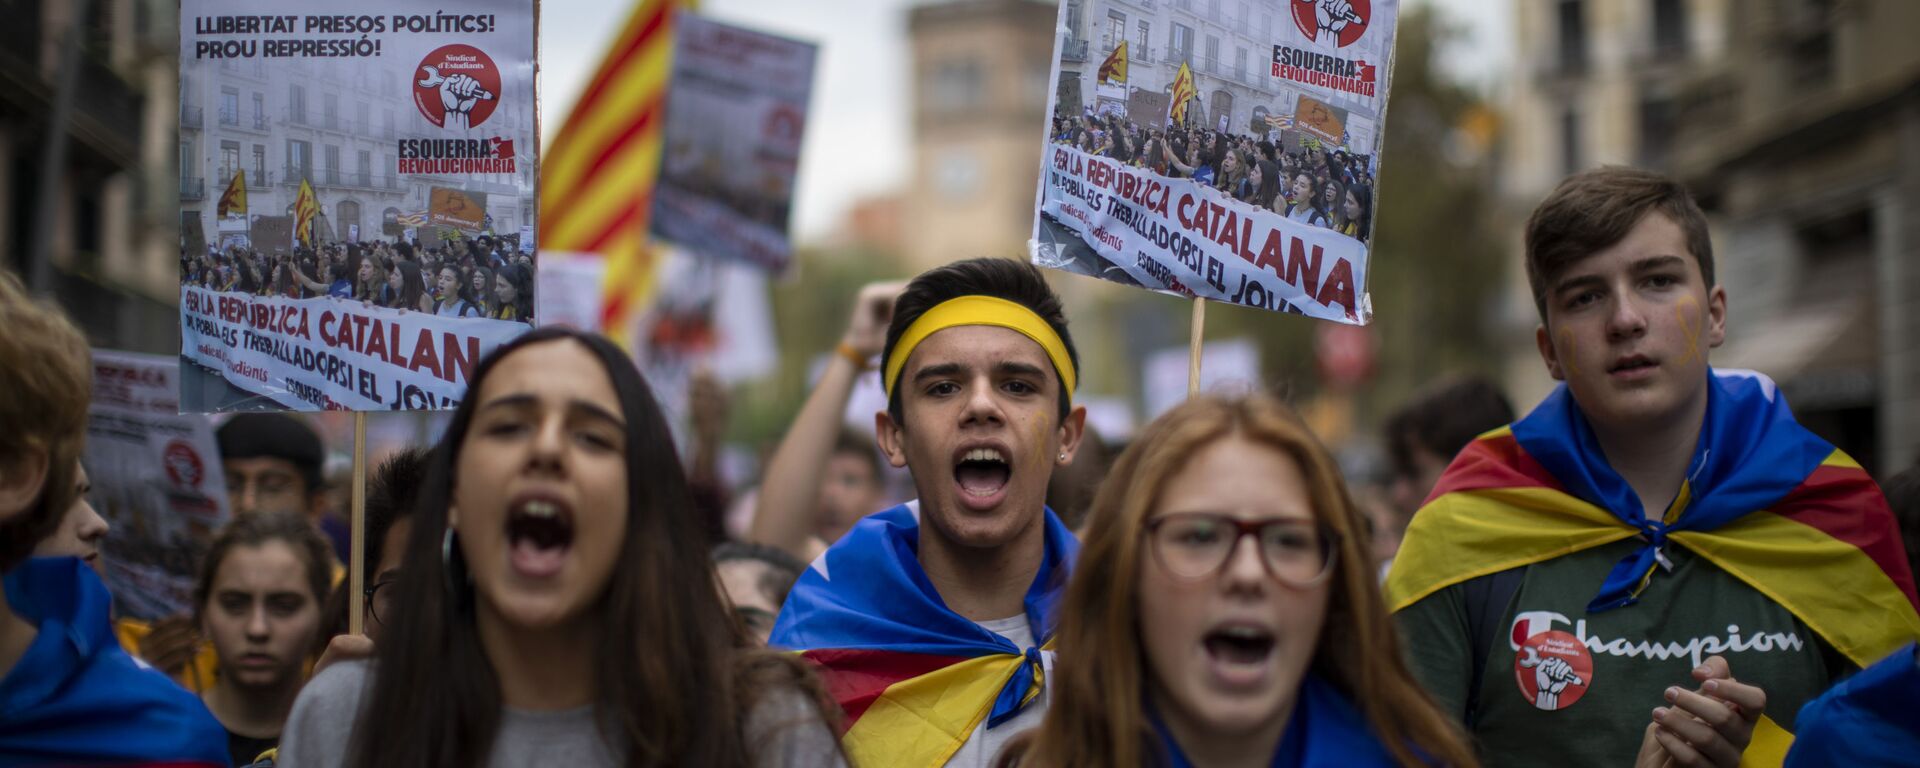 Students protest during a demonstration in Barcelona, Spain, Thursday, Oct. 31, 2019. Hundreds of young people decided to set up camp after Spain's Supreme Court convicted 12 separatist leaders of illegally promoting Catalonia region's independence and sentenced nine of them to prison. - Sputnik International, 1920, 19.01.2023